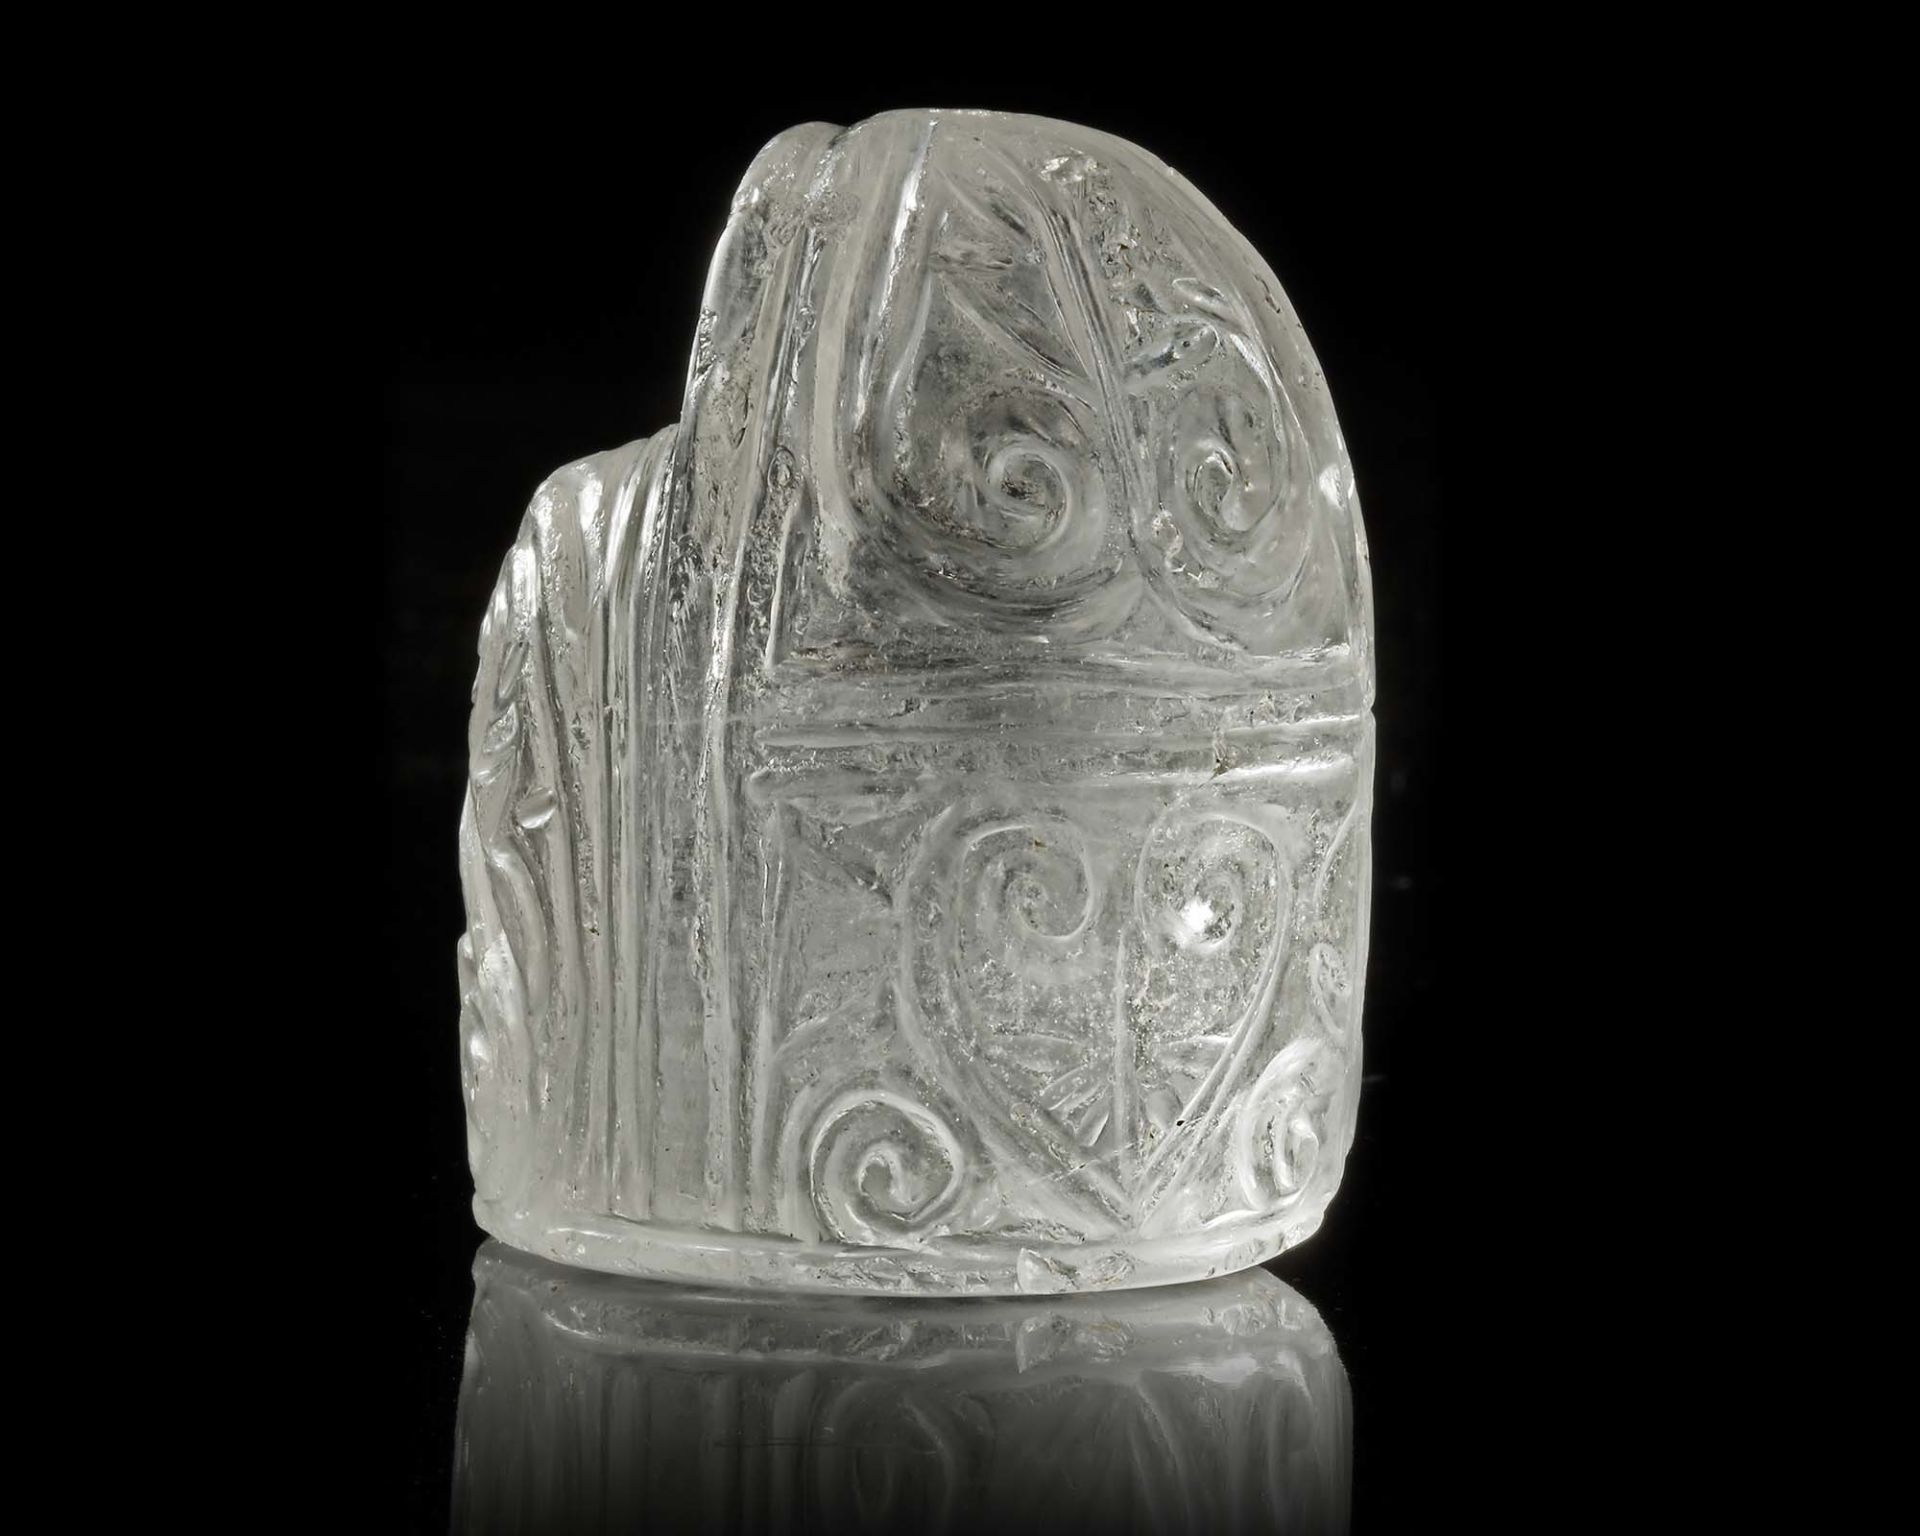 A KING (SHAH) ROCK CRYSTAL CHESS PIECE, IRAQ OR KHORASAN, LATE 9TH-EARLY 10TH CENTURY - Image 7 of 14